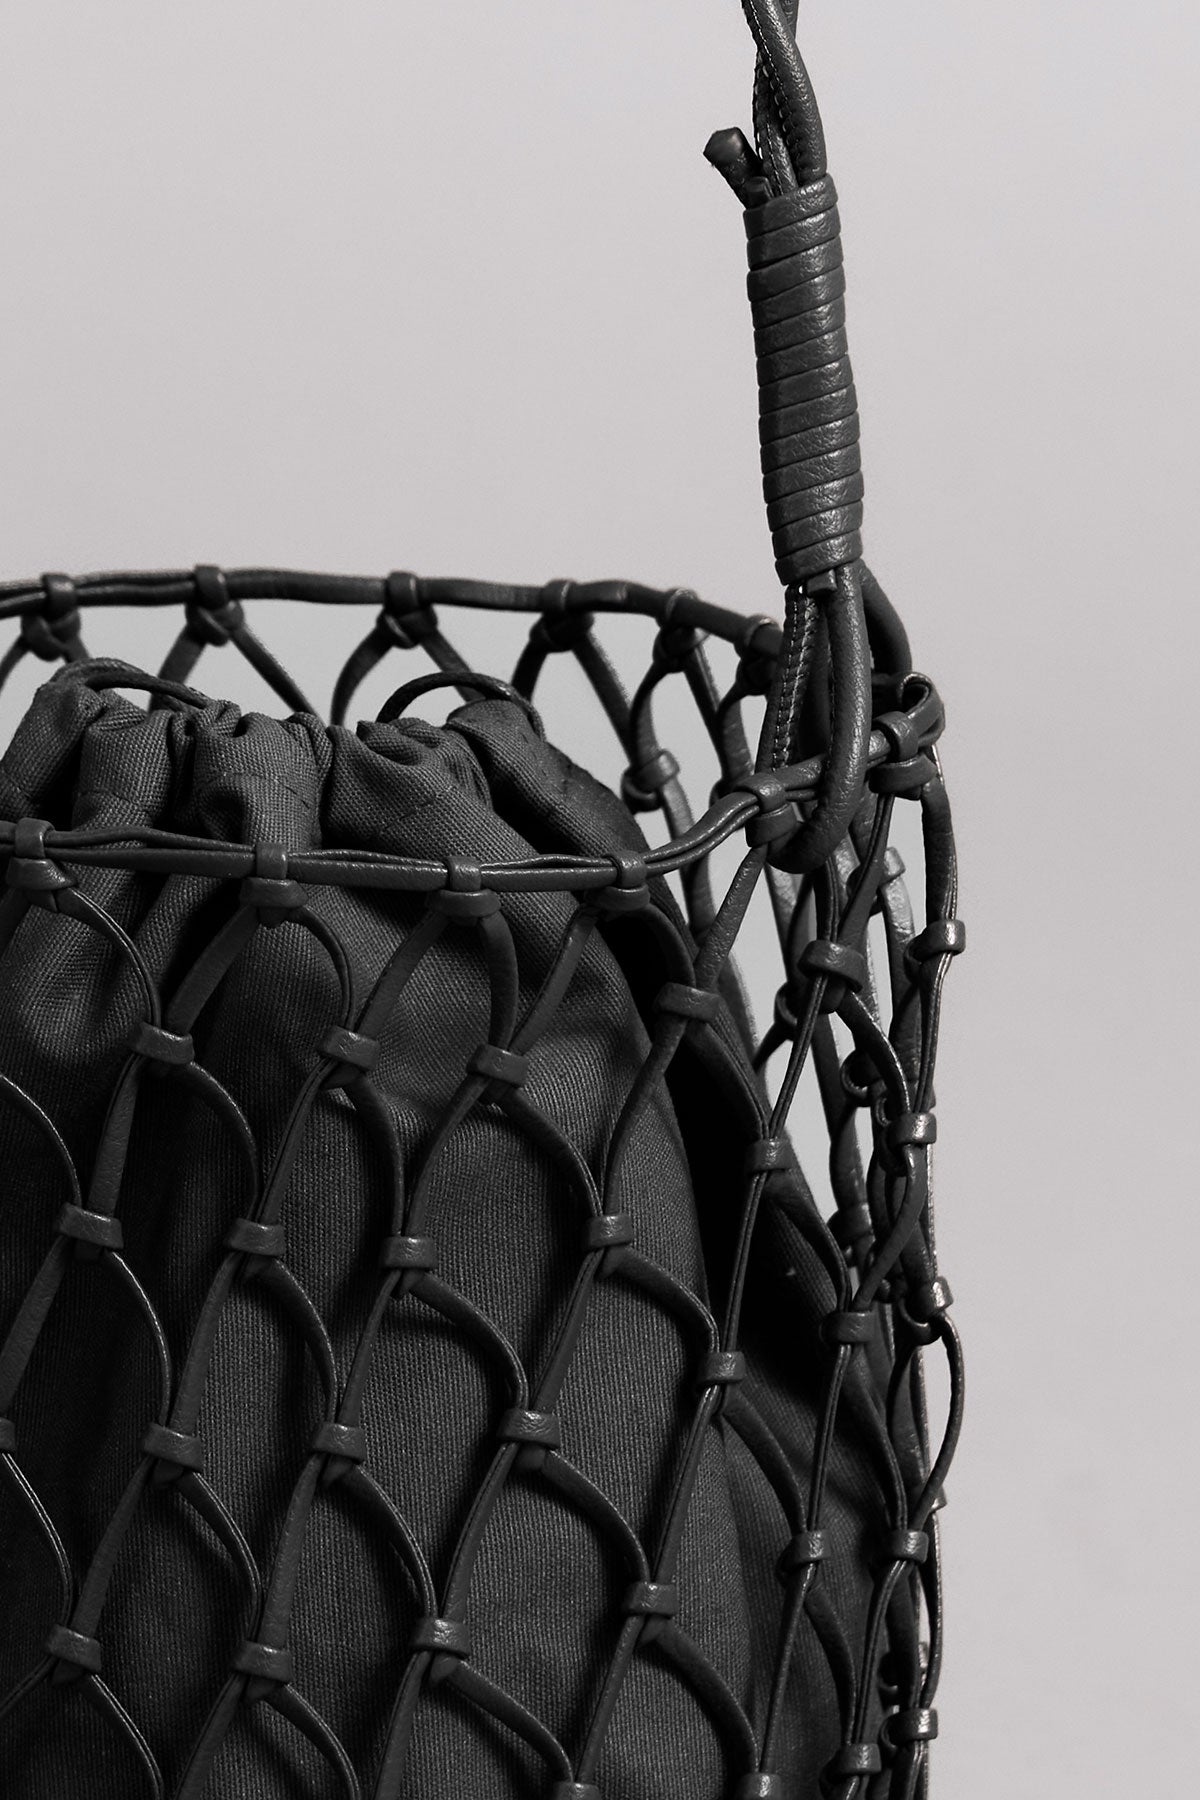 Close-up of a black Velvet by Graham & Spencer mesh tote bag containing a textured item, with a focus on the tightly interwoven, knotted details of the mesh design.-36281640157377